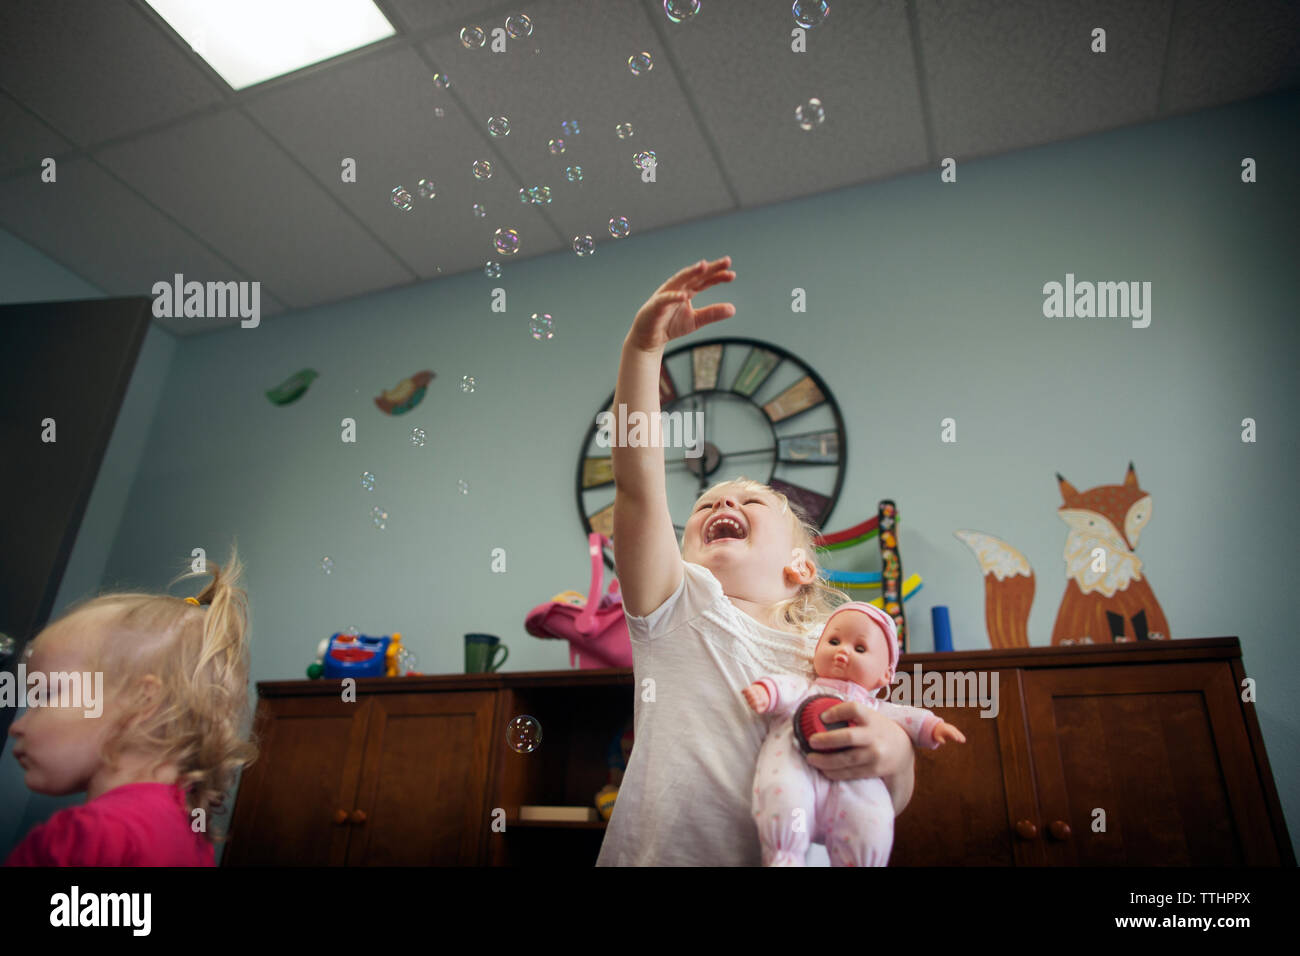 Low angle view of cheerful girl playing with bubbles at preschool Stock Photo